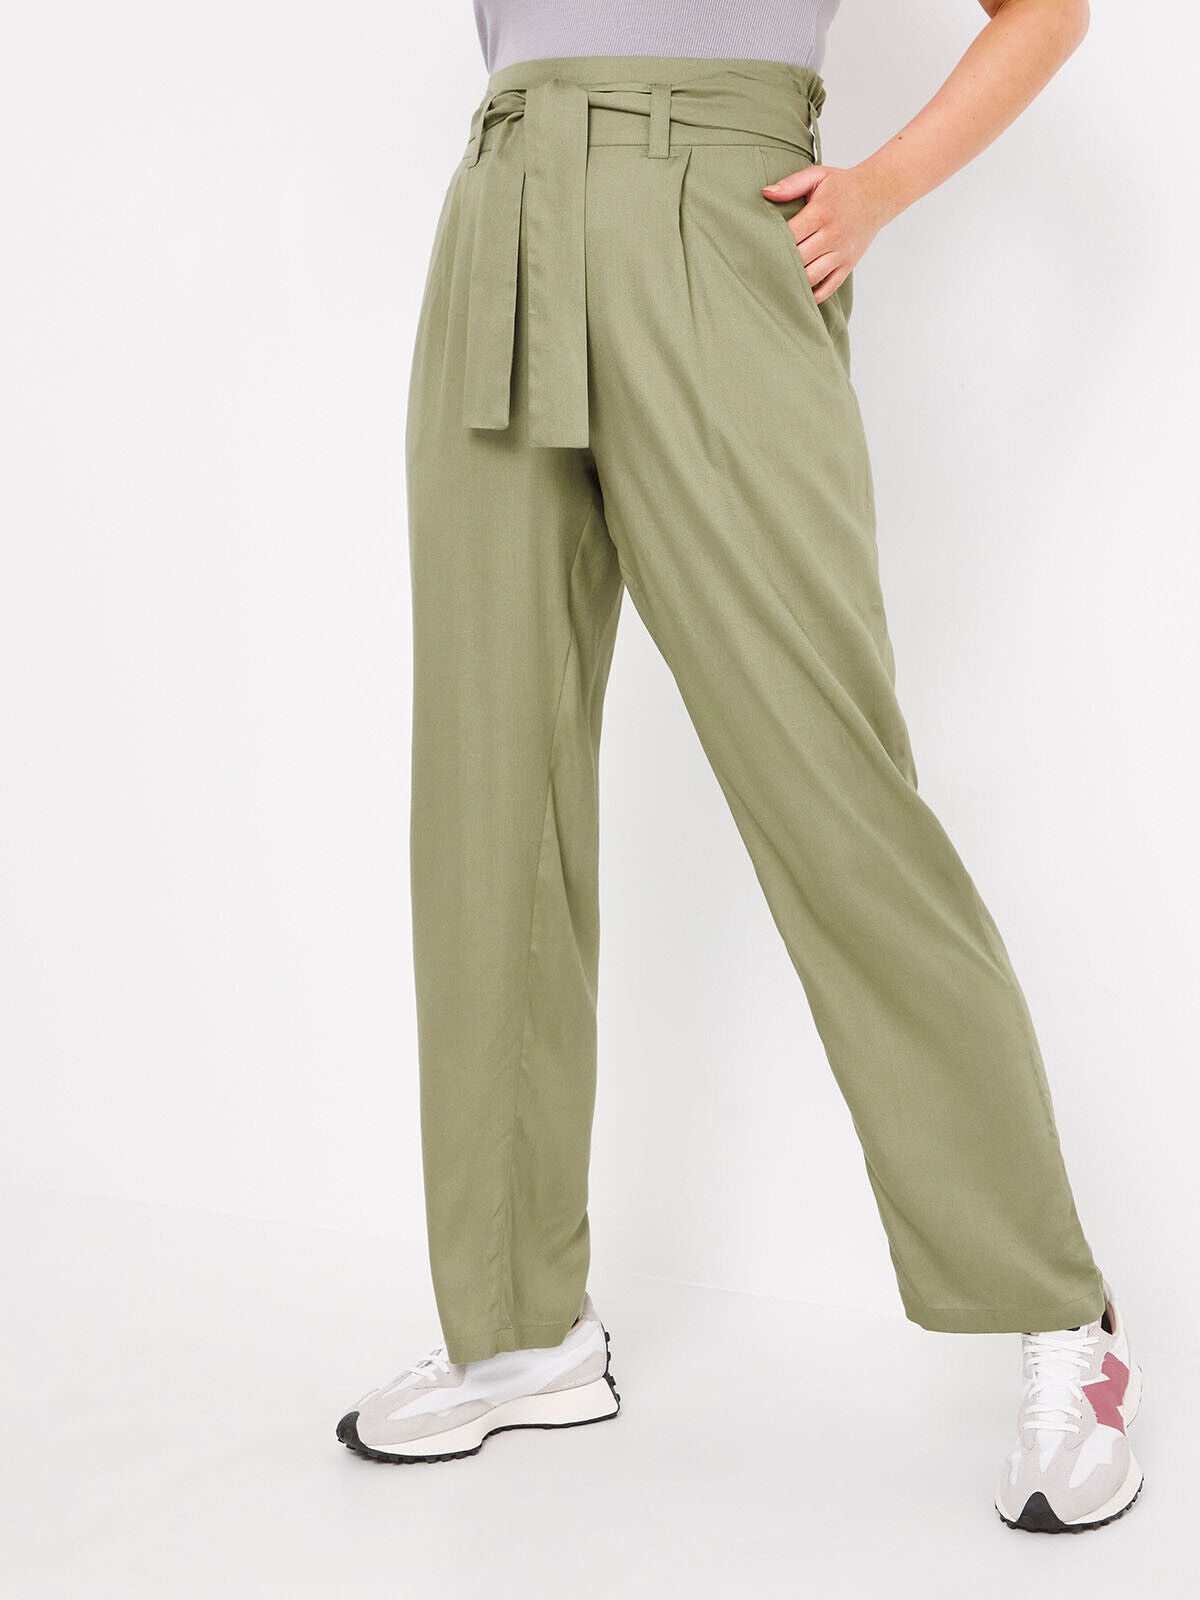 Gabardine Trousers - Formal Wear - Rough And Tough